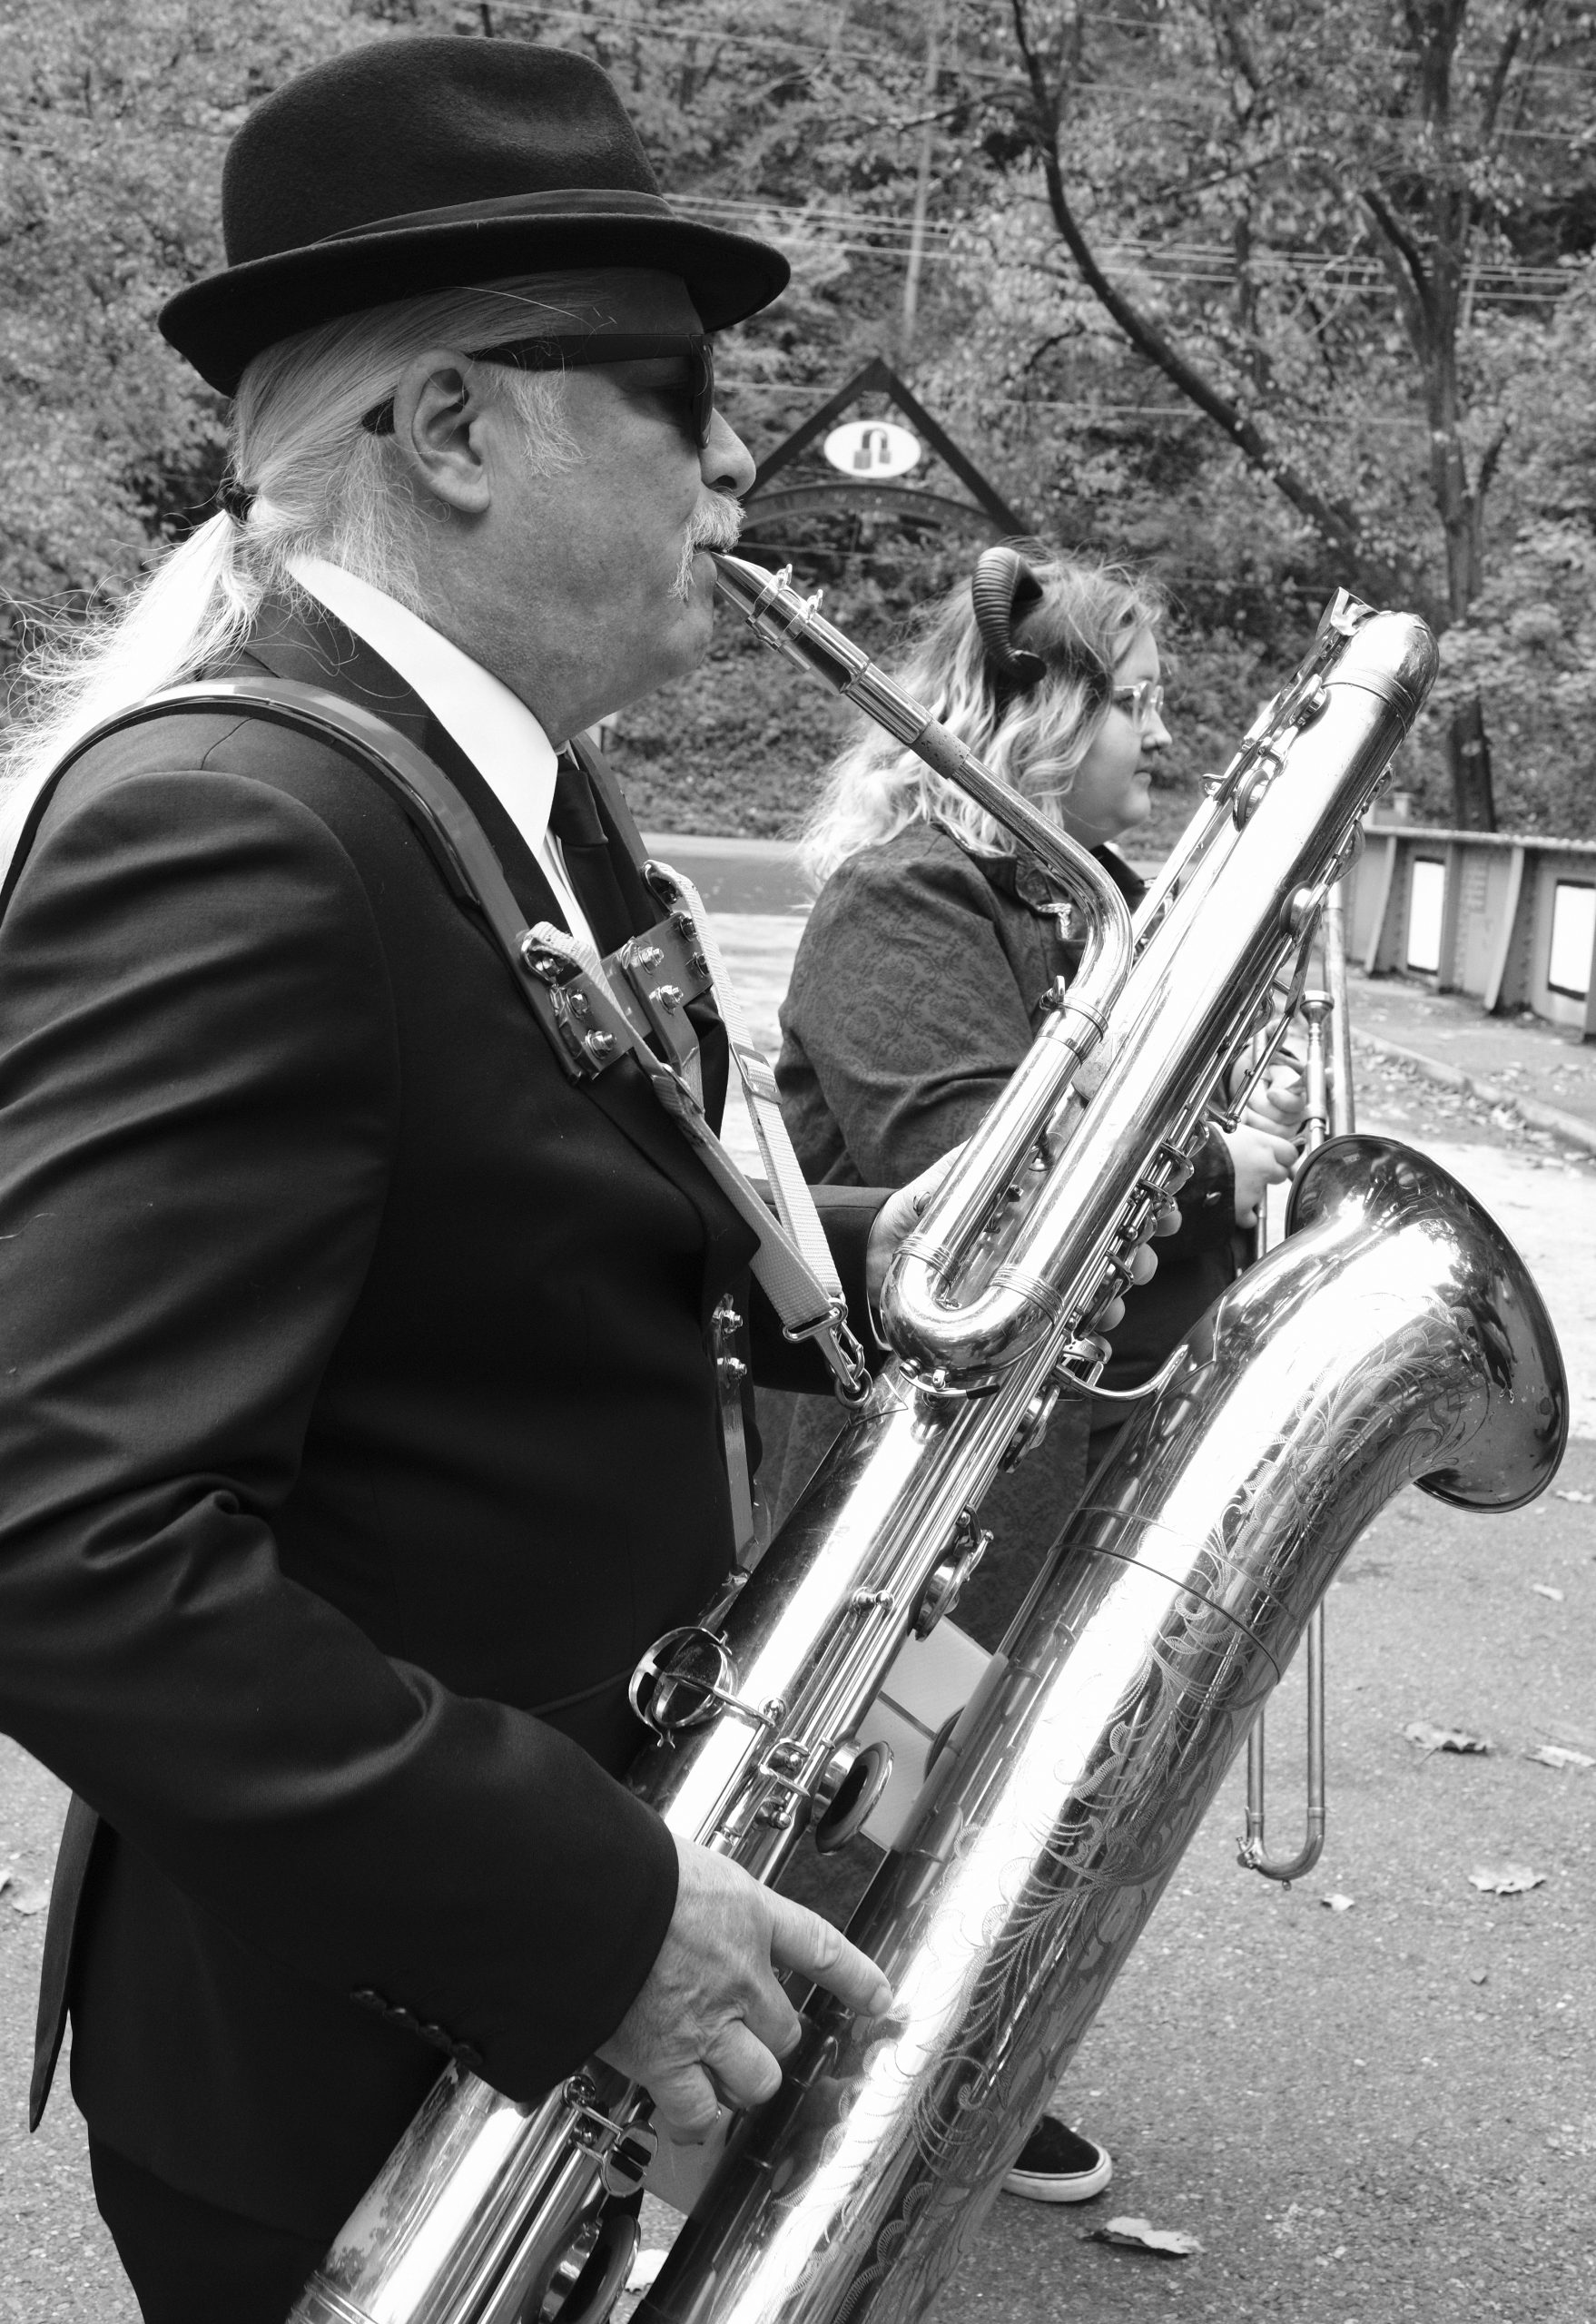 A baritone sax player in the Big Easy Easton Brass band performs at the Come As You Art/Arf costume parade on the Karl Stirner Arts Trail in Easton, Pennsylvania.